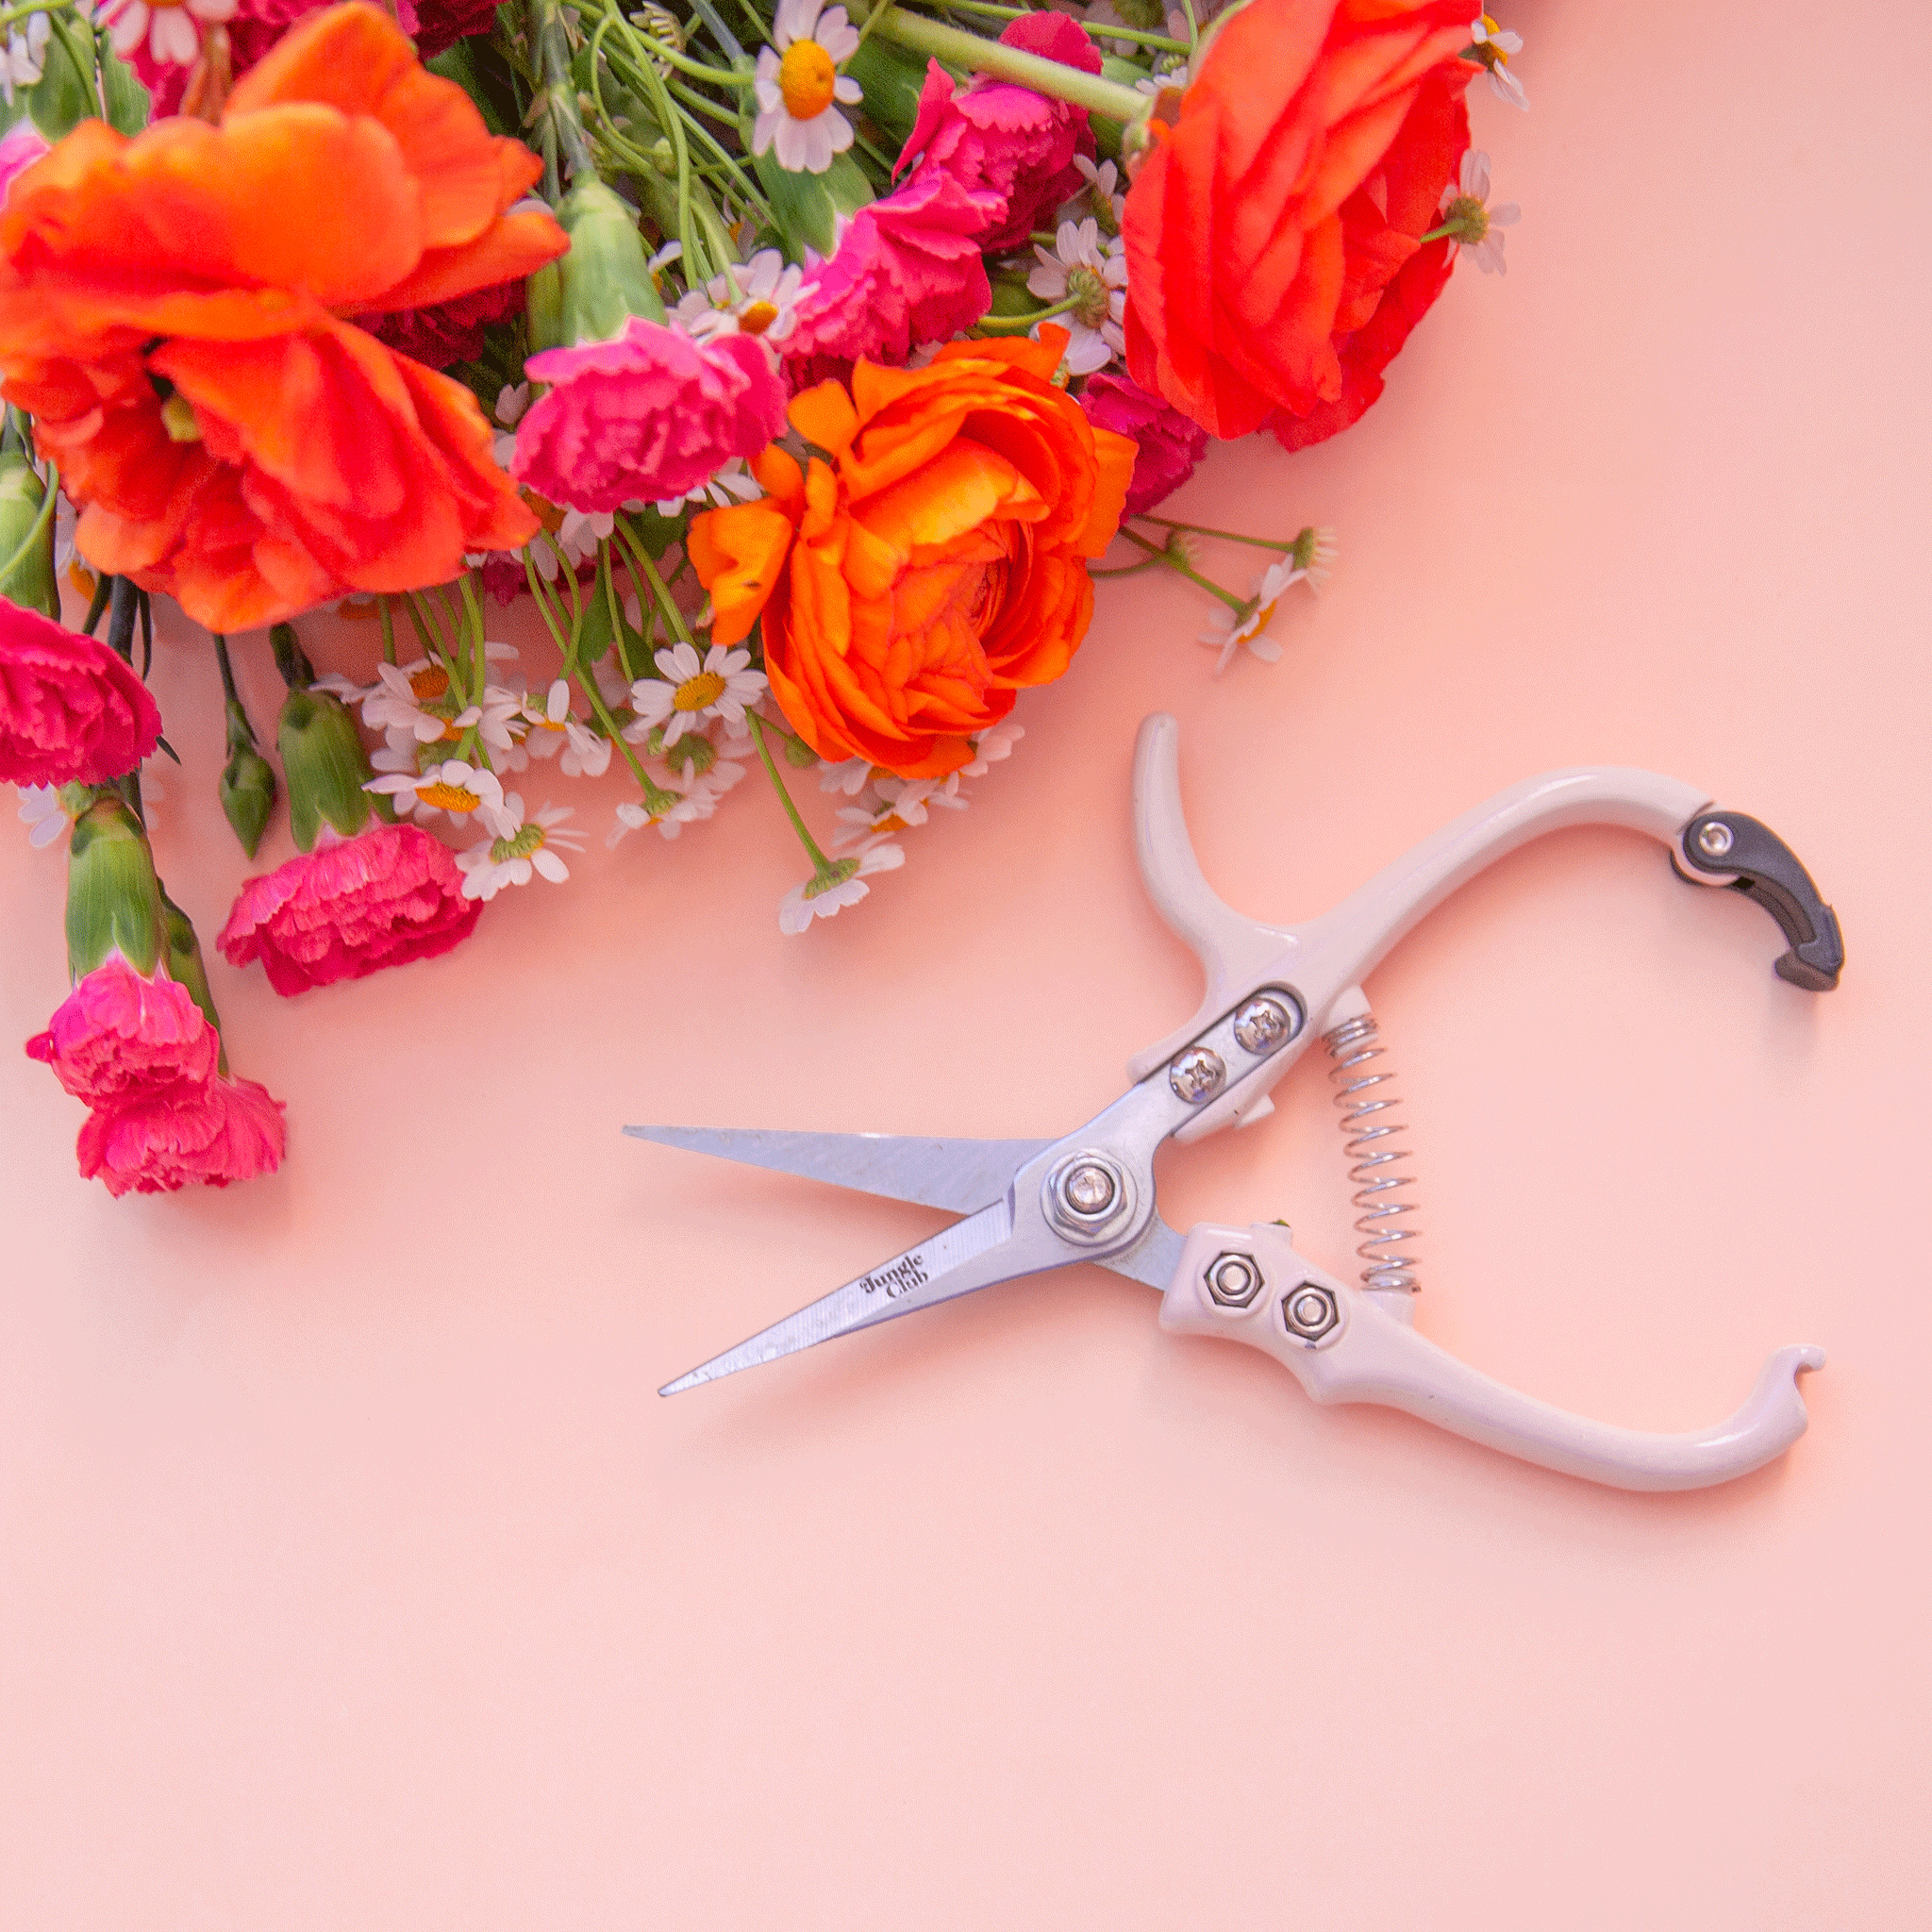 Pruning shears with a narrow tip, and light cream colored handle and a black clasp to connect when shears are not in use. There is small black text on the side of the shears that read, "Jungle Club".